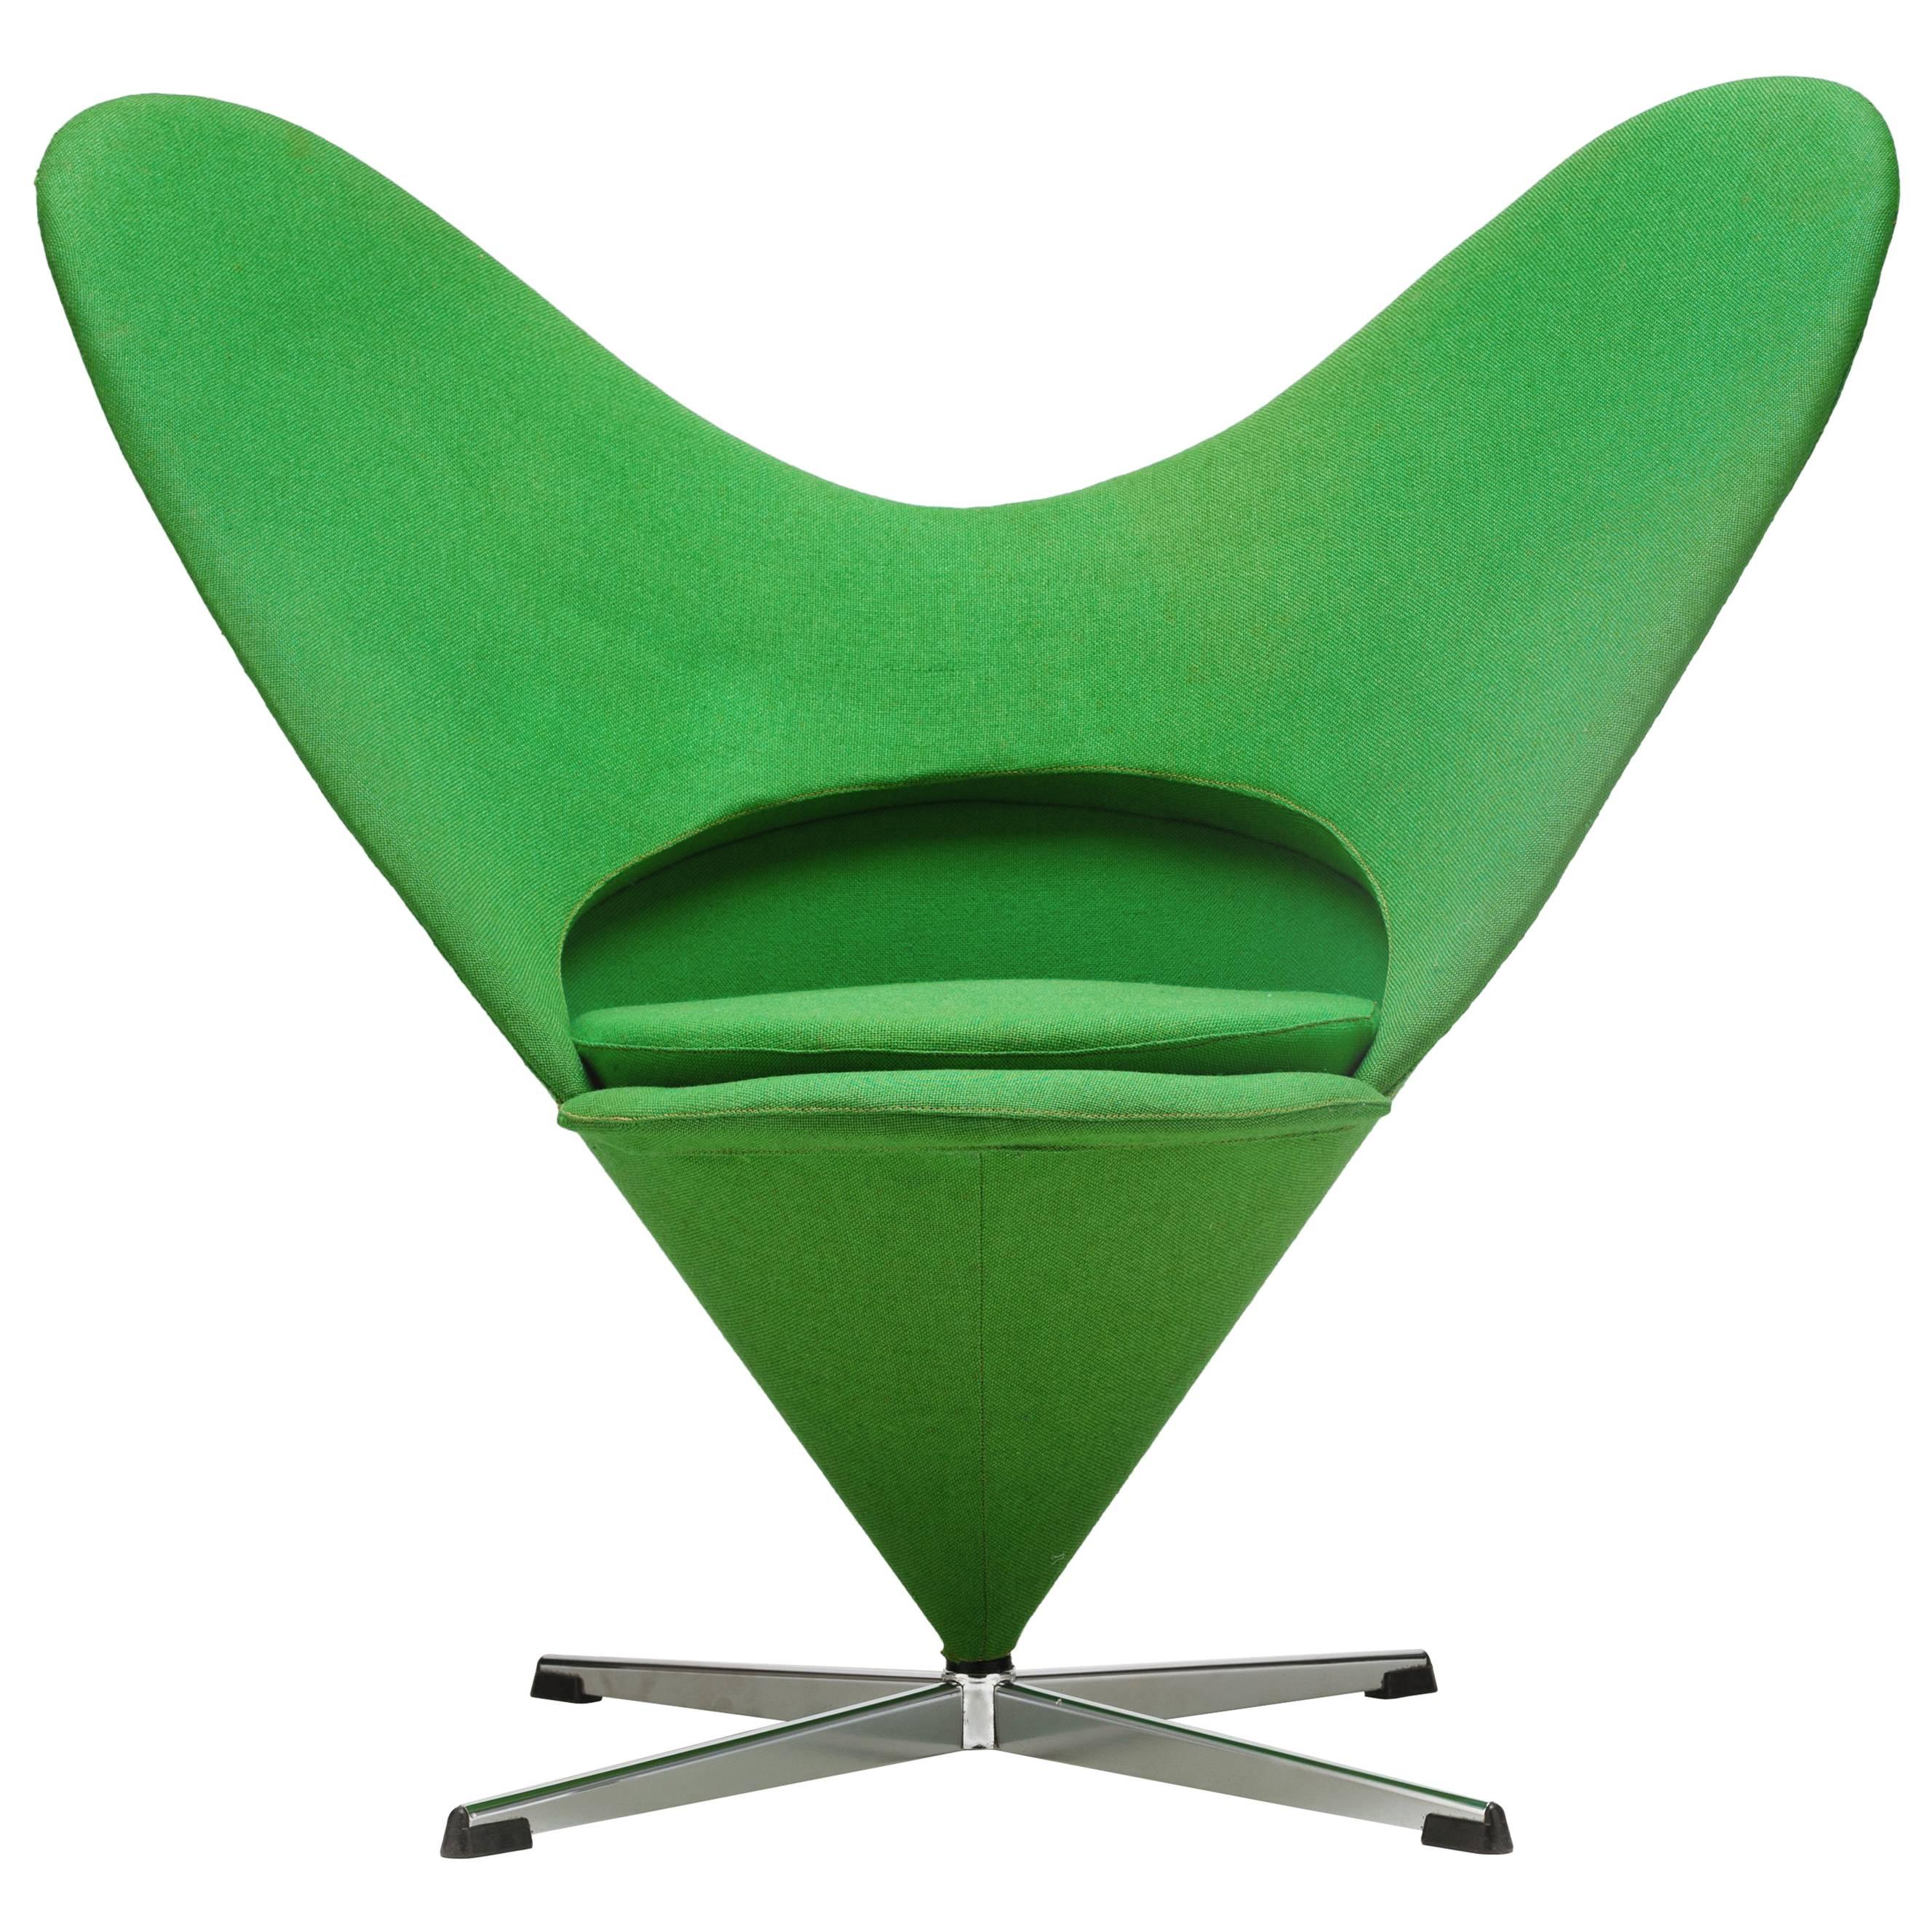 Early K3 'Heart Cone' Chair by Verner Panton